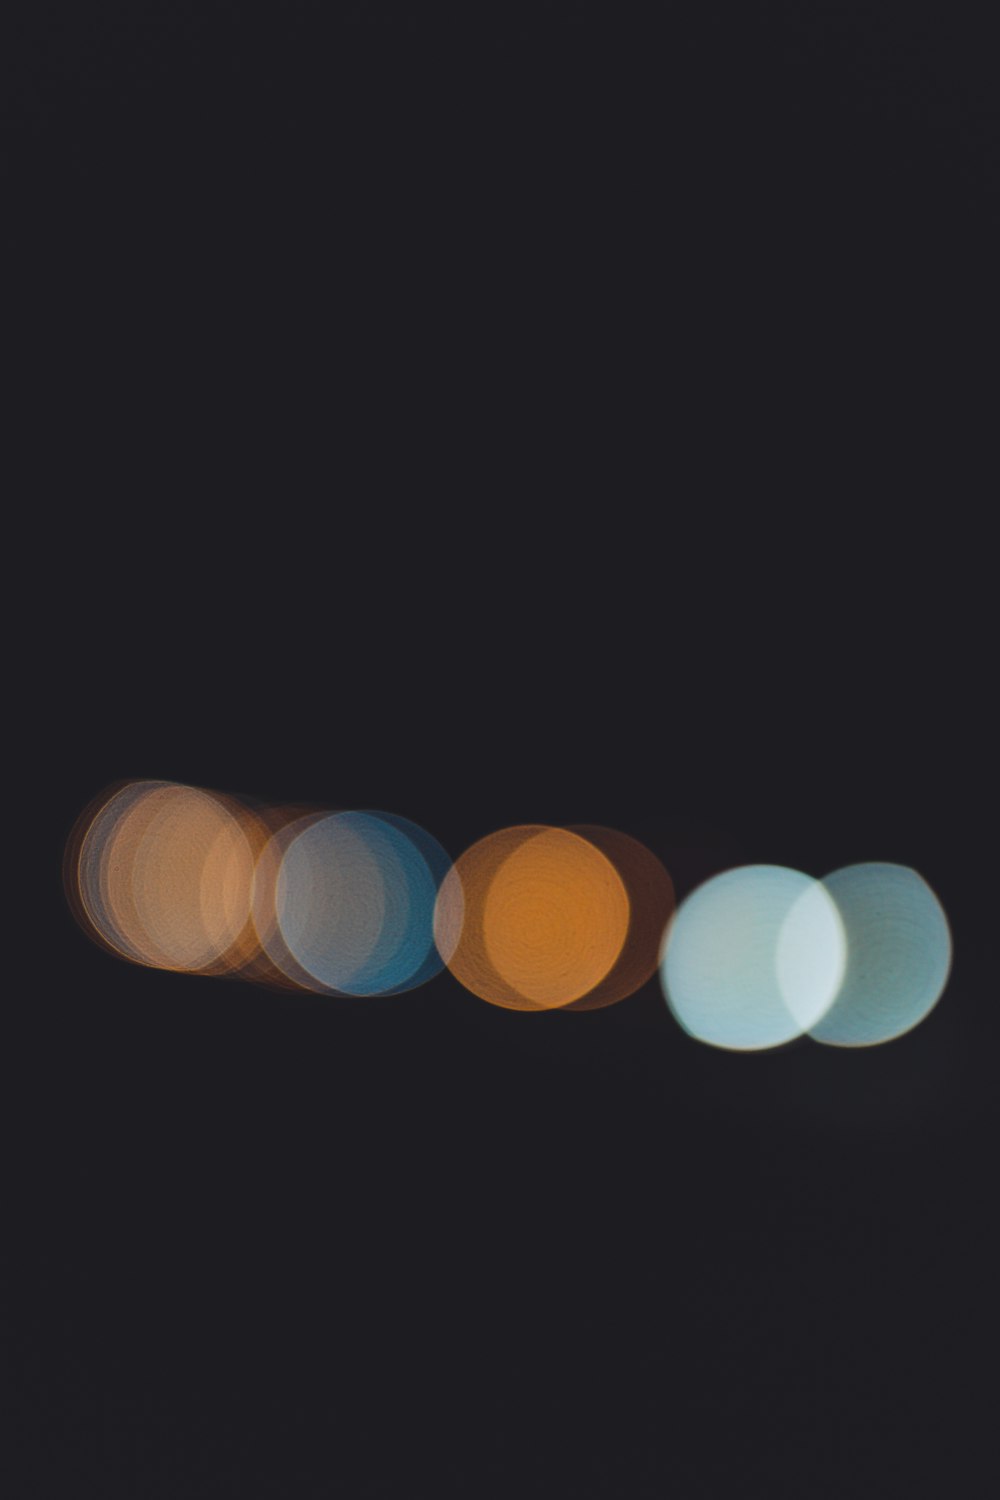 a group of blurry lights in the dark